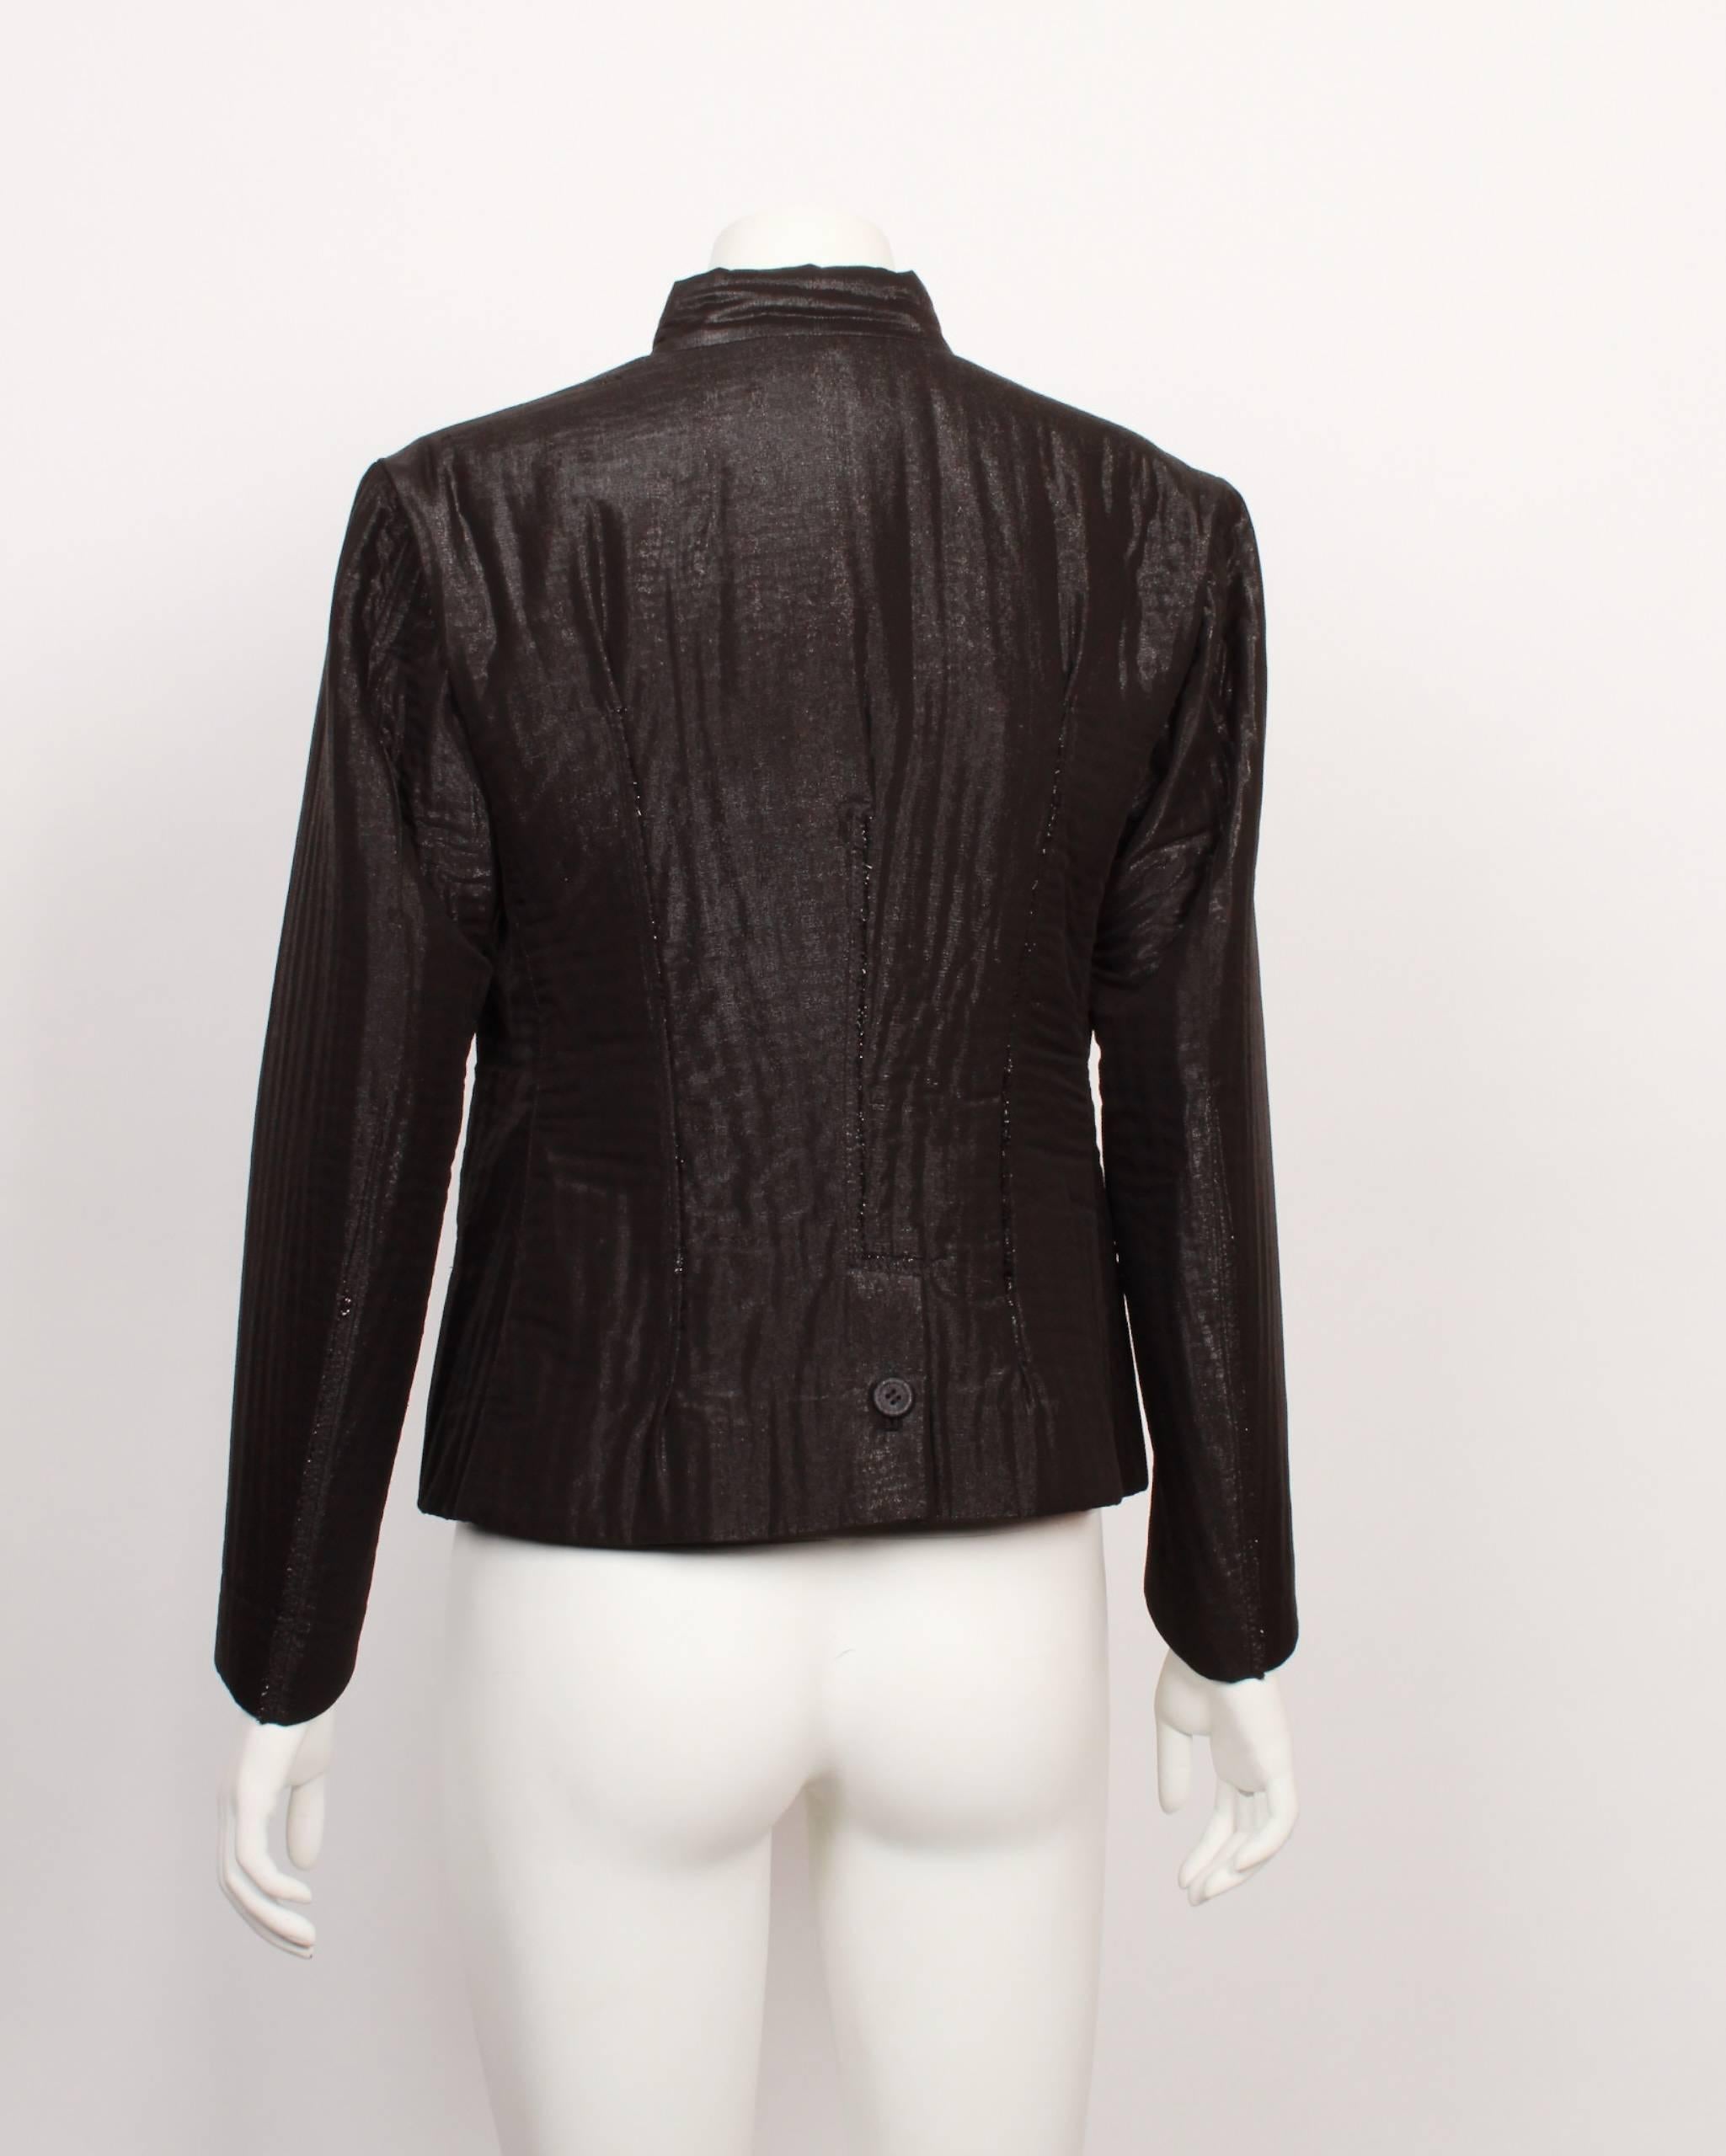 Issey Miyake Jacket In Good Condition For Sale In Melbourne, Victoria